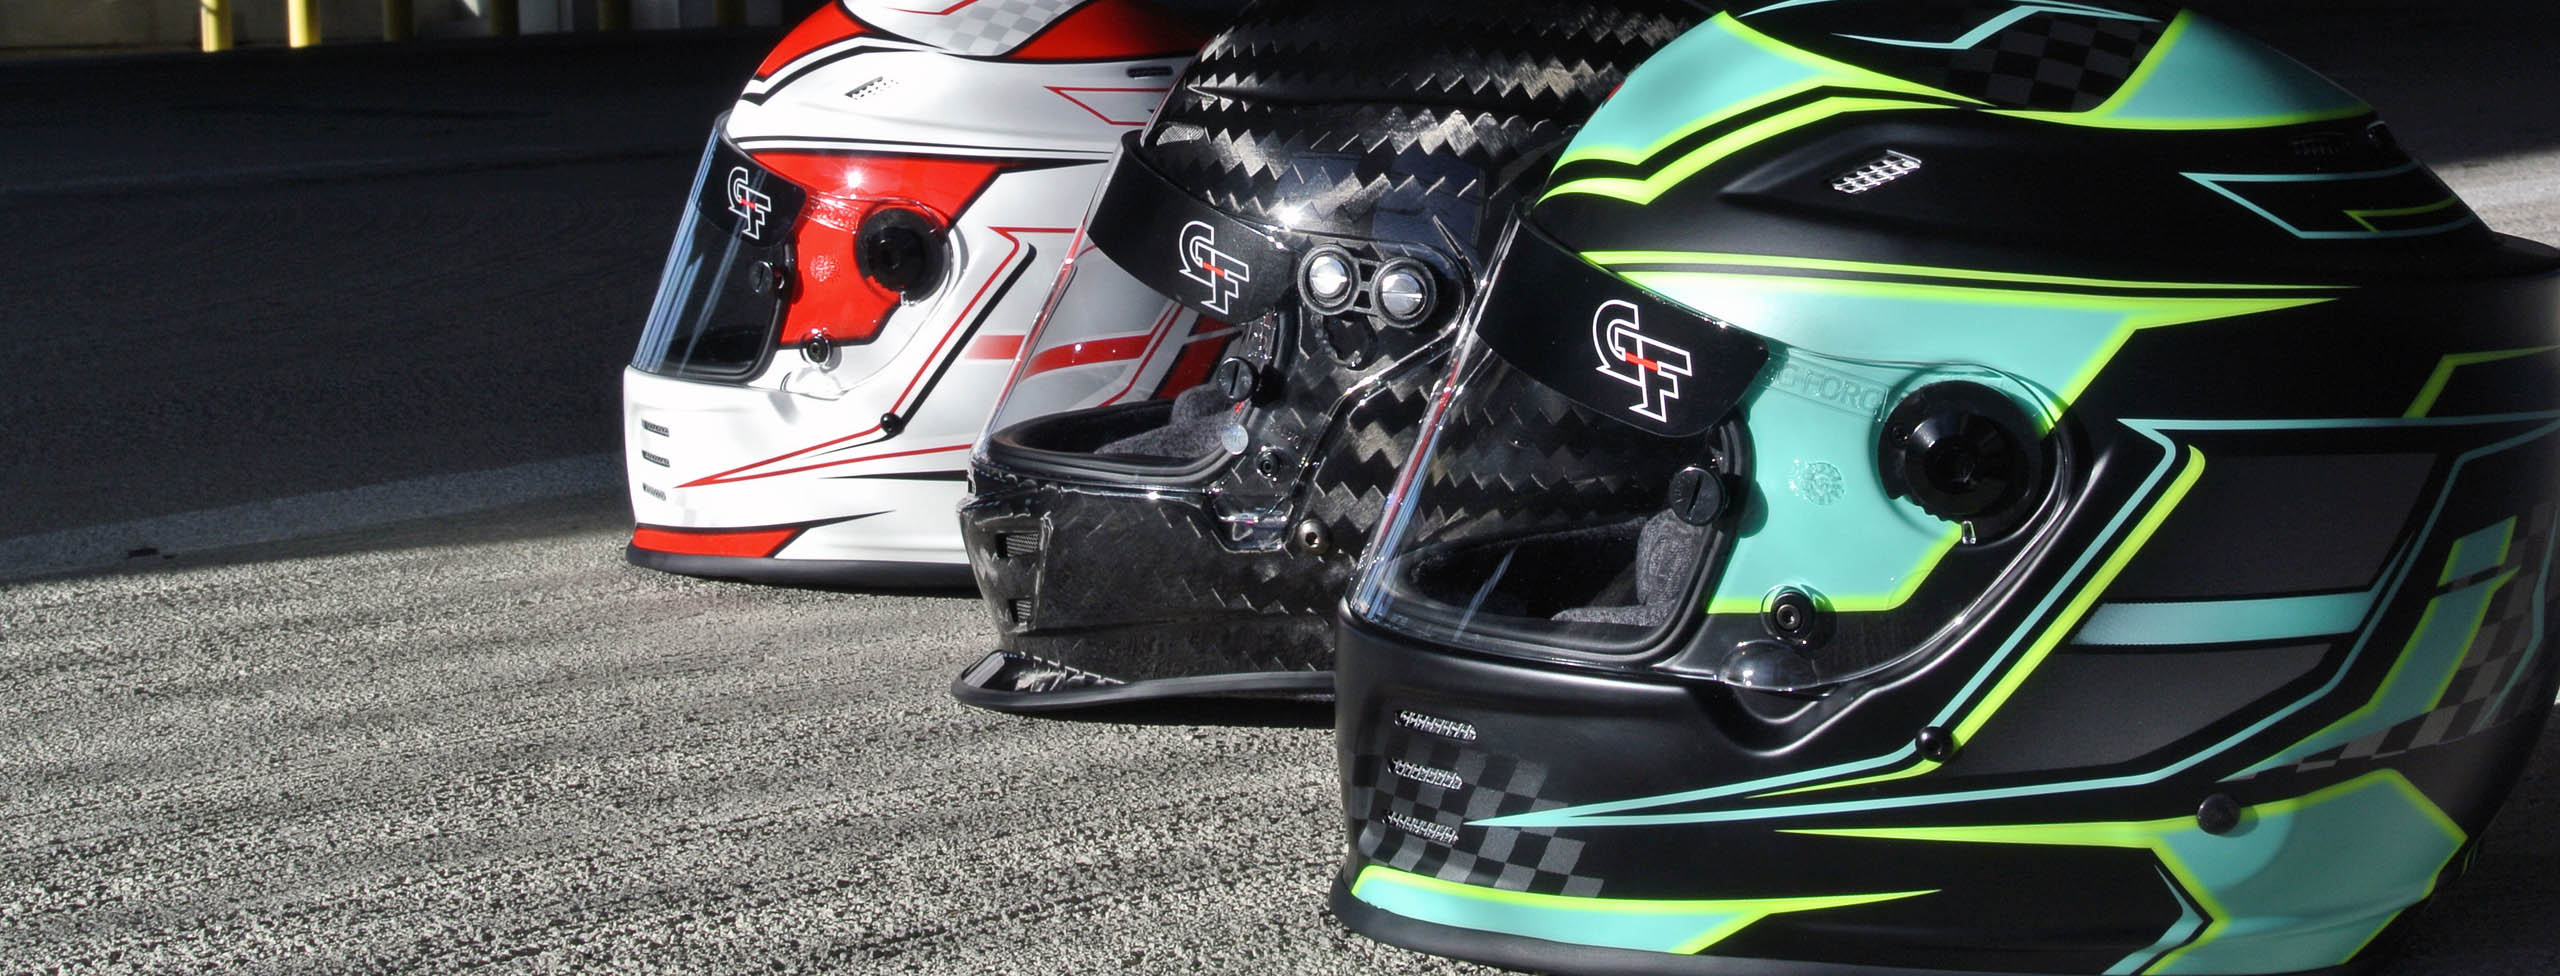 New Carbon Fiber and Graphic Helmets from G-force 